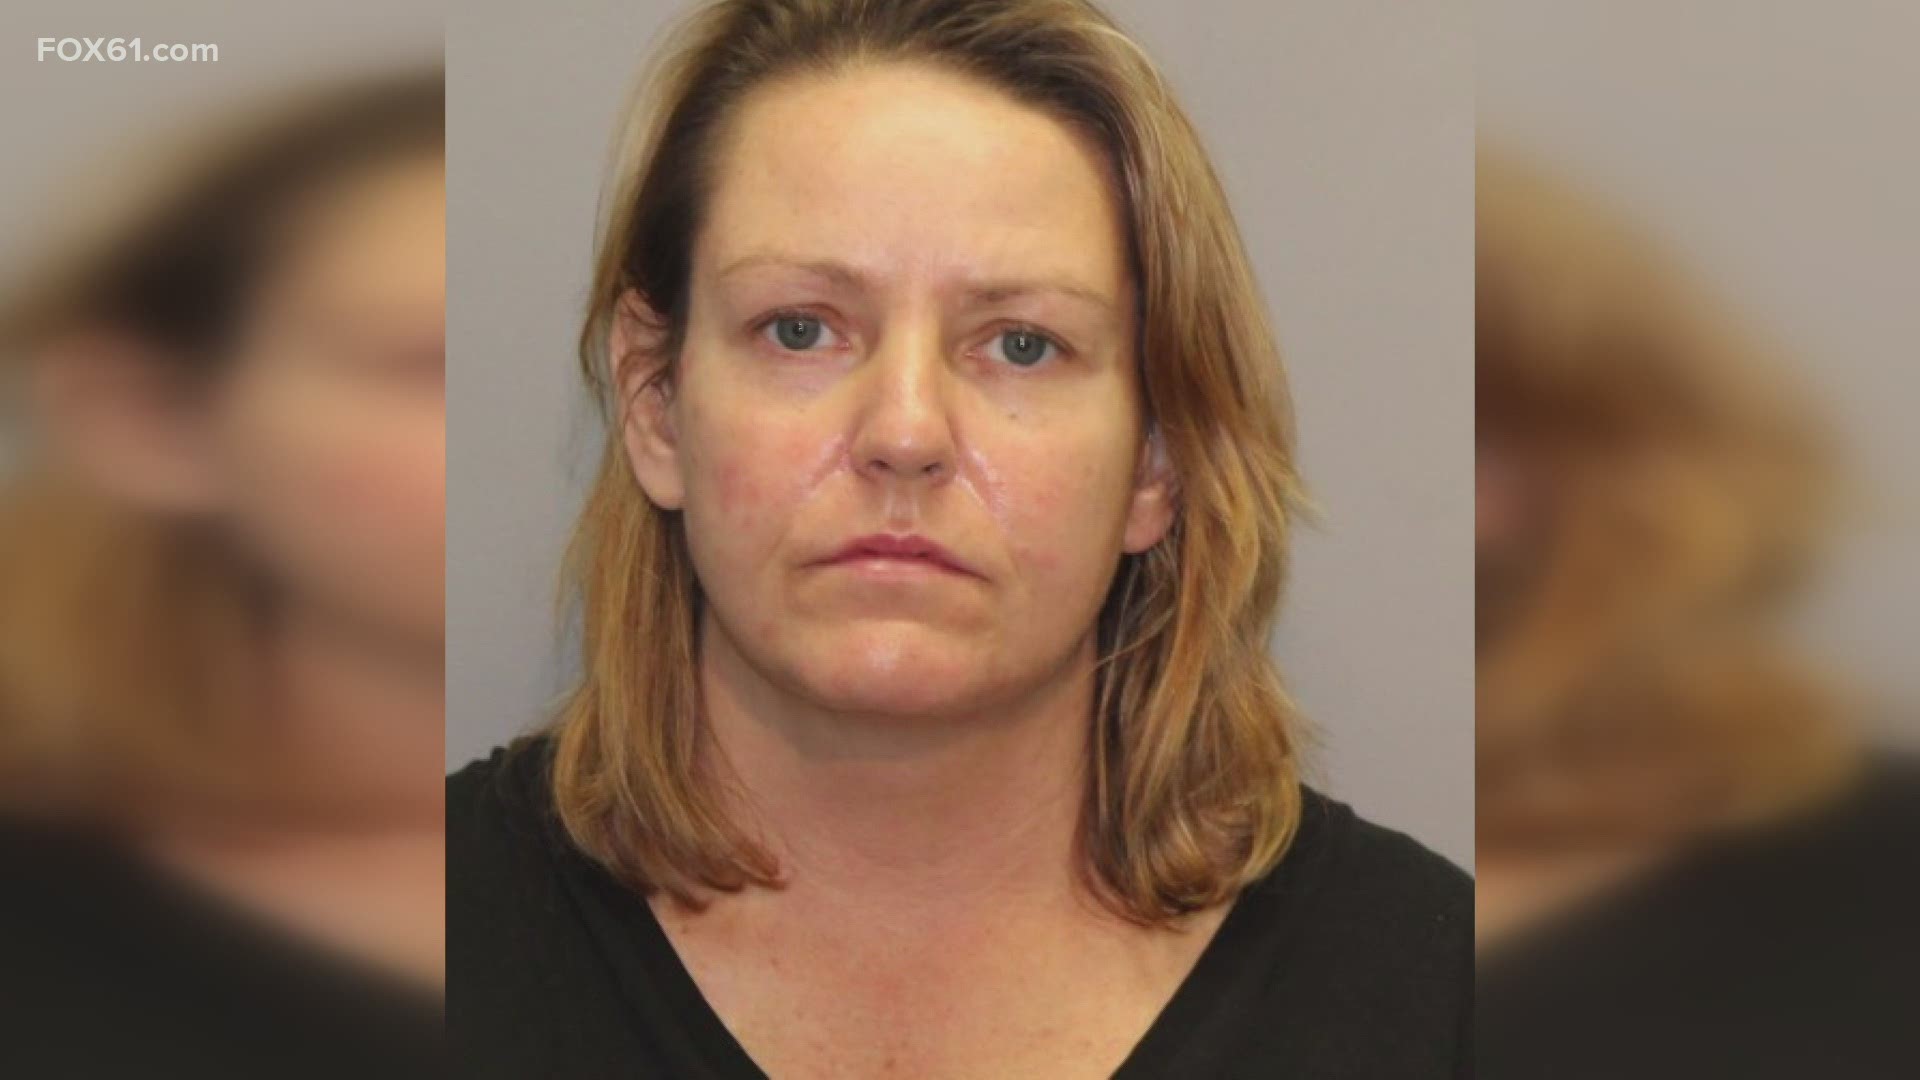 An Alabama woman has been charged with murder after a fatal shooting incident that took place Monday night, police said Friday.